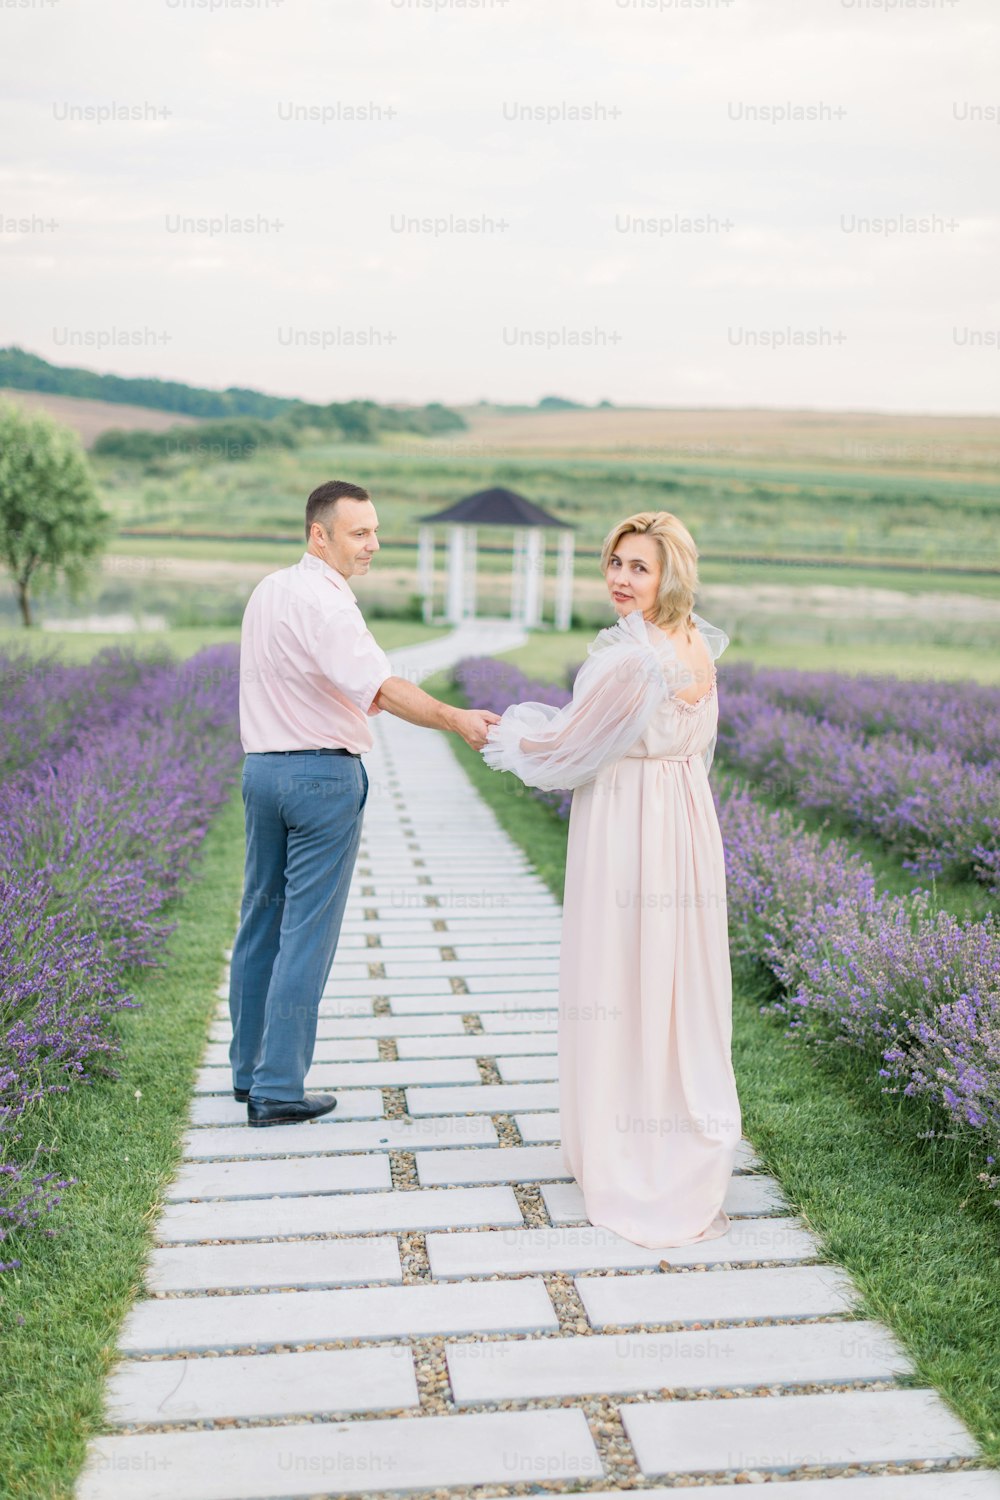 Outdoor shot of happy romantic mature couple in love walking on pathway through flowering lavender field, holding hands and enjoying moments together